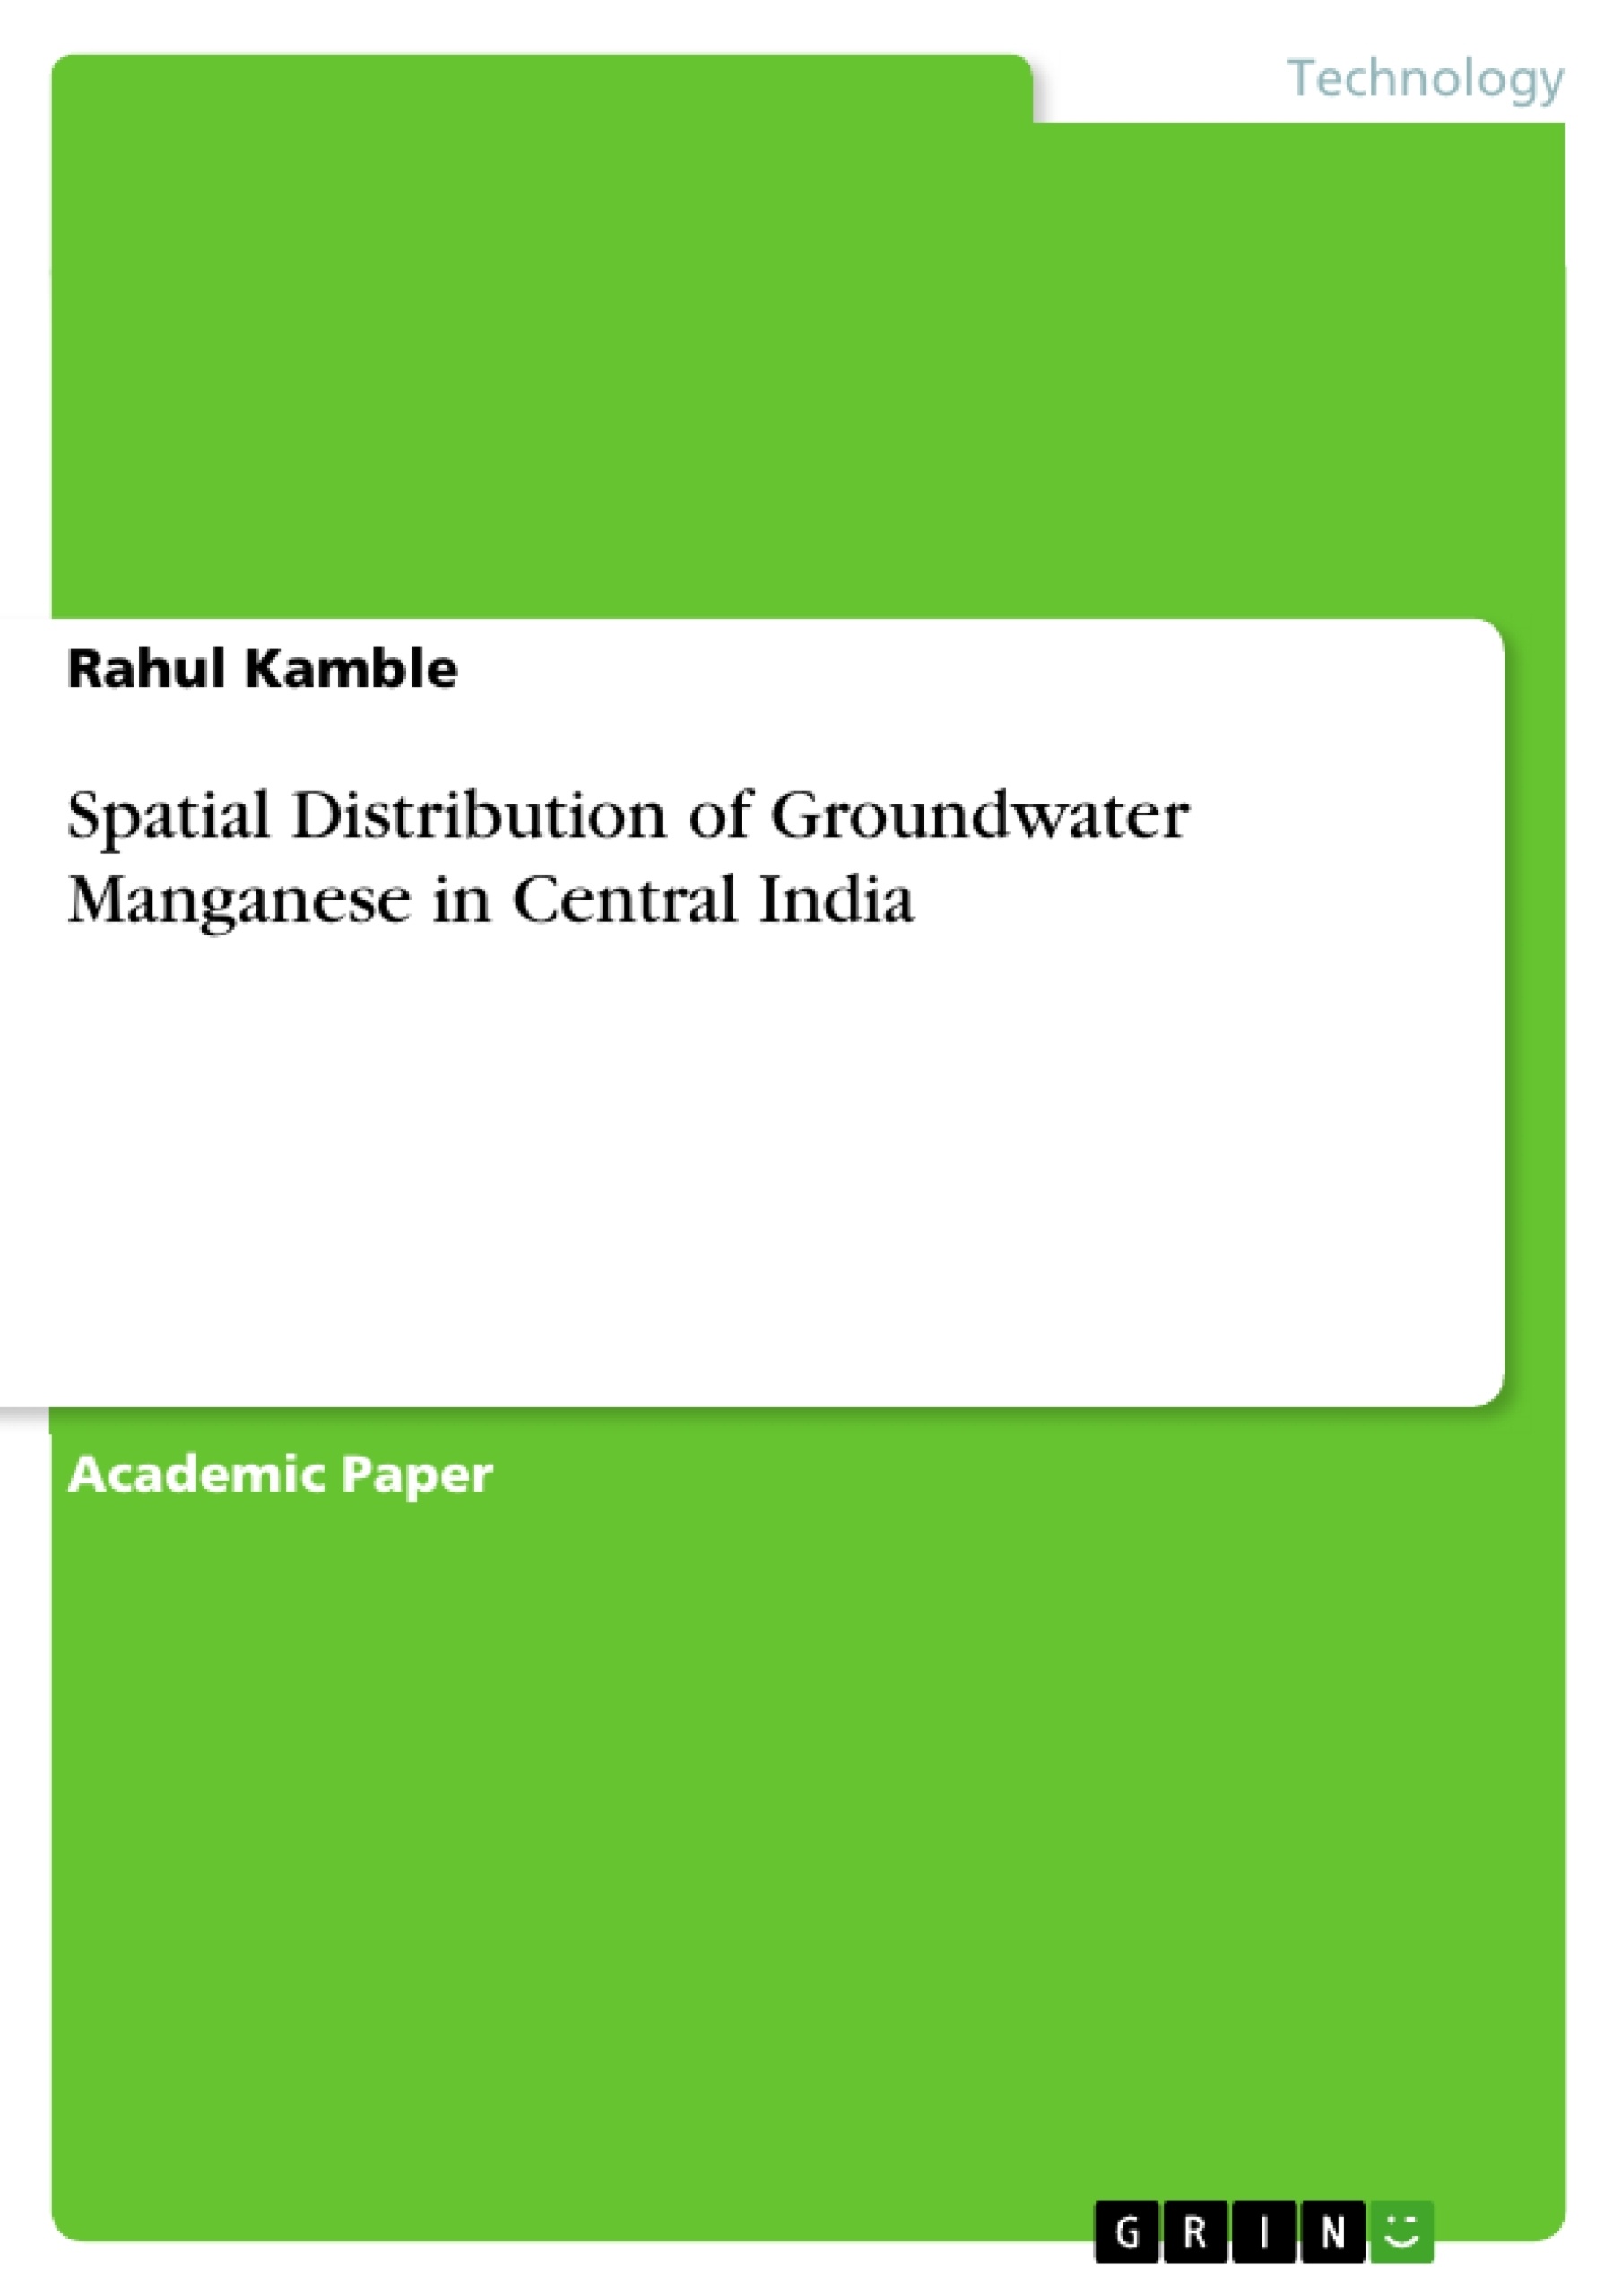 Title: Spatial Distribution of Groundwater Manganese in Central India